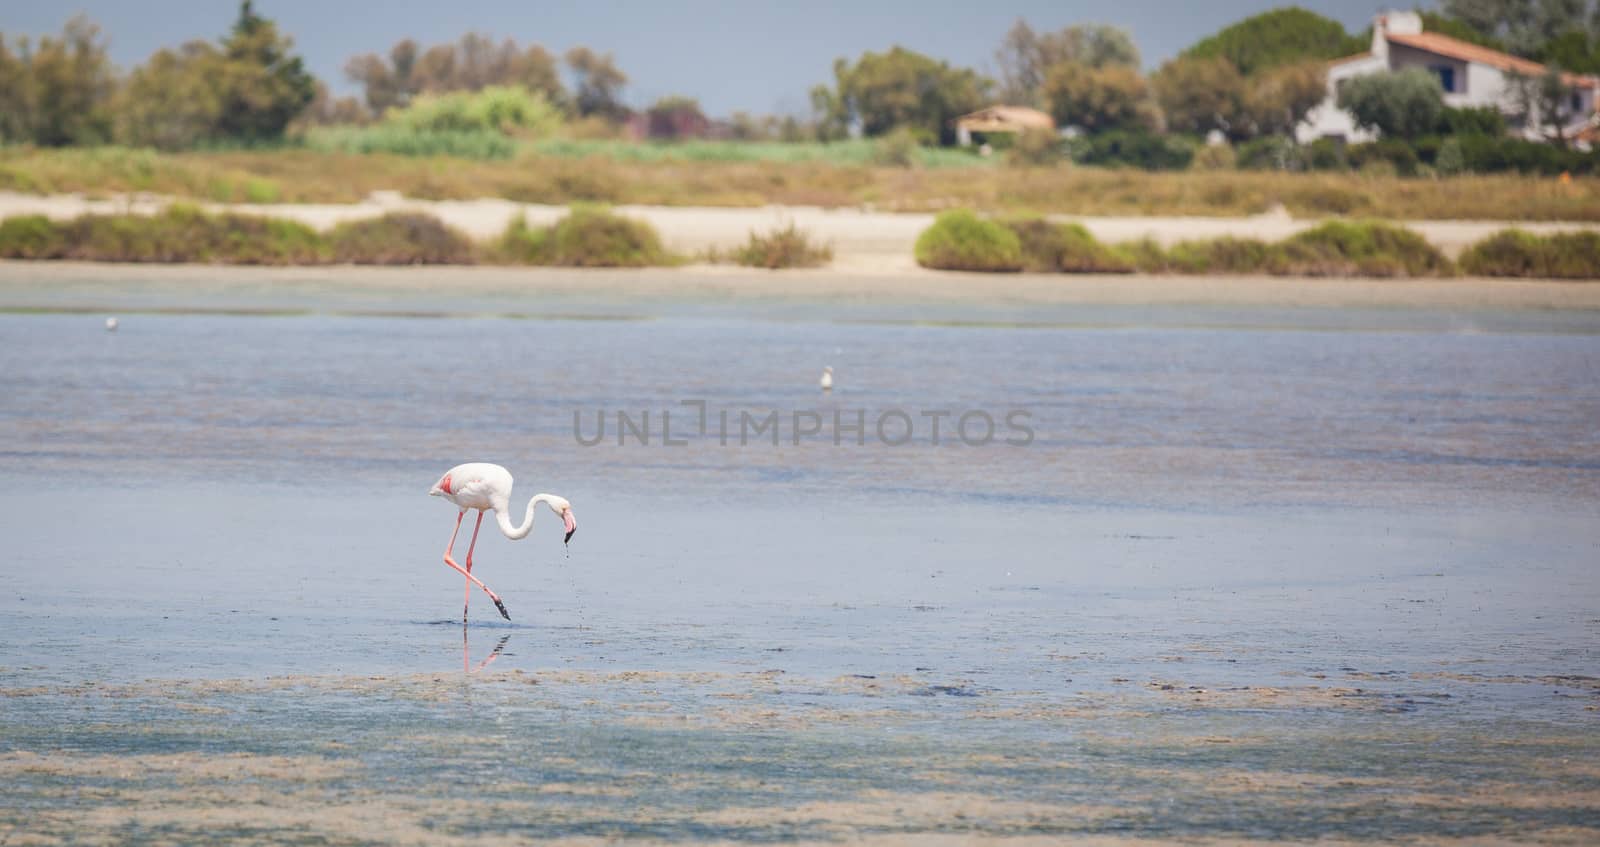 Flamingos in the water of the Camargue in France